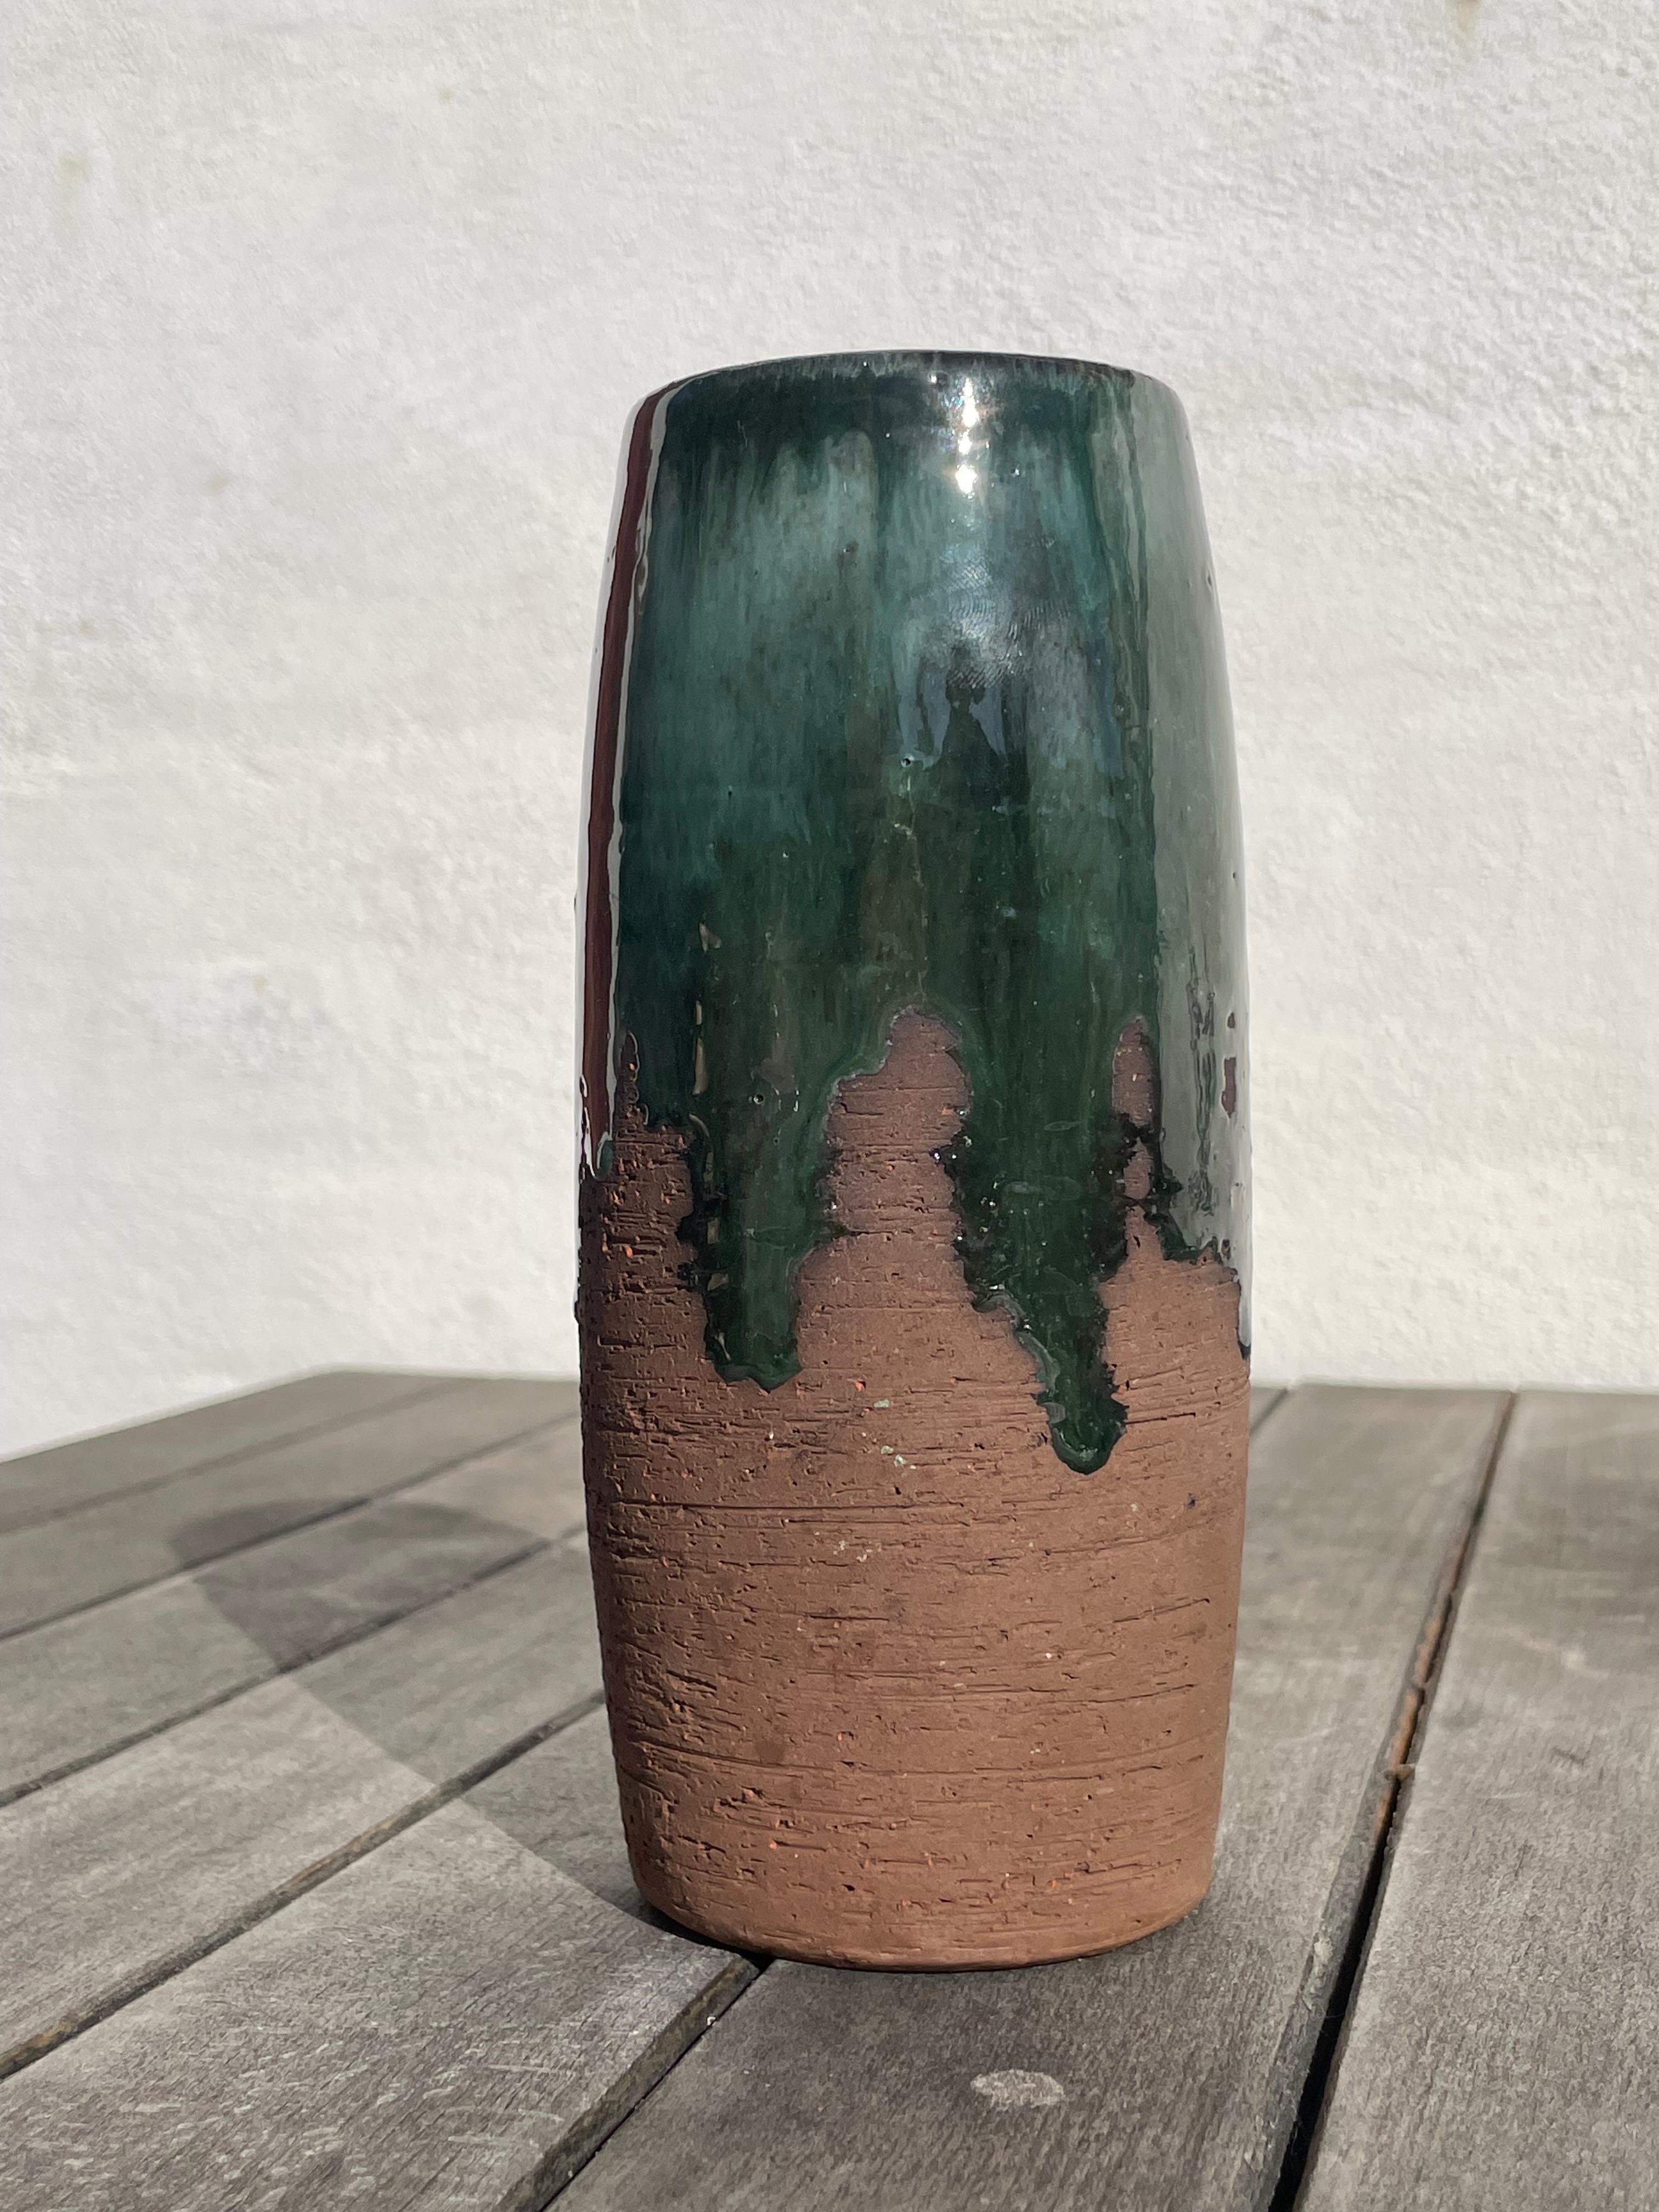 Shiny dark forest green and light blue colored glaze running down over raw dark brown chamotte clay. Designed and hand-crafted by Danish designer Robert Bentsen in the late 1960s. Signed under base. A unique, rustic Scandinavian modern piece in